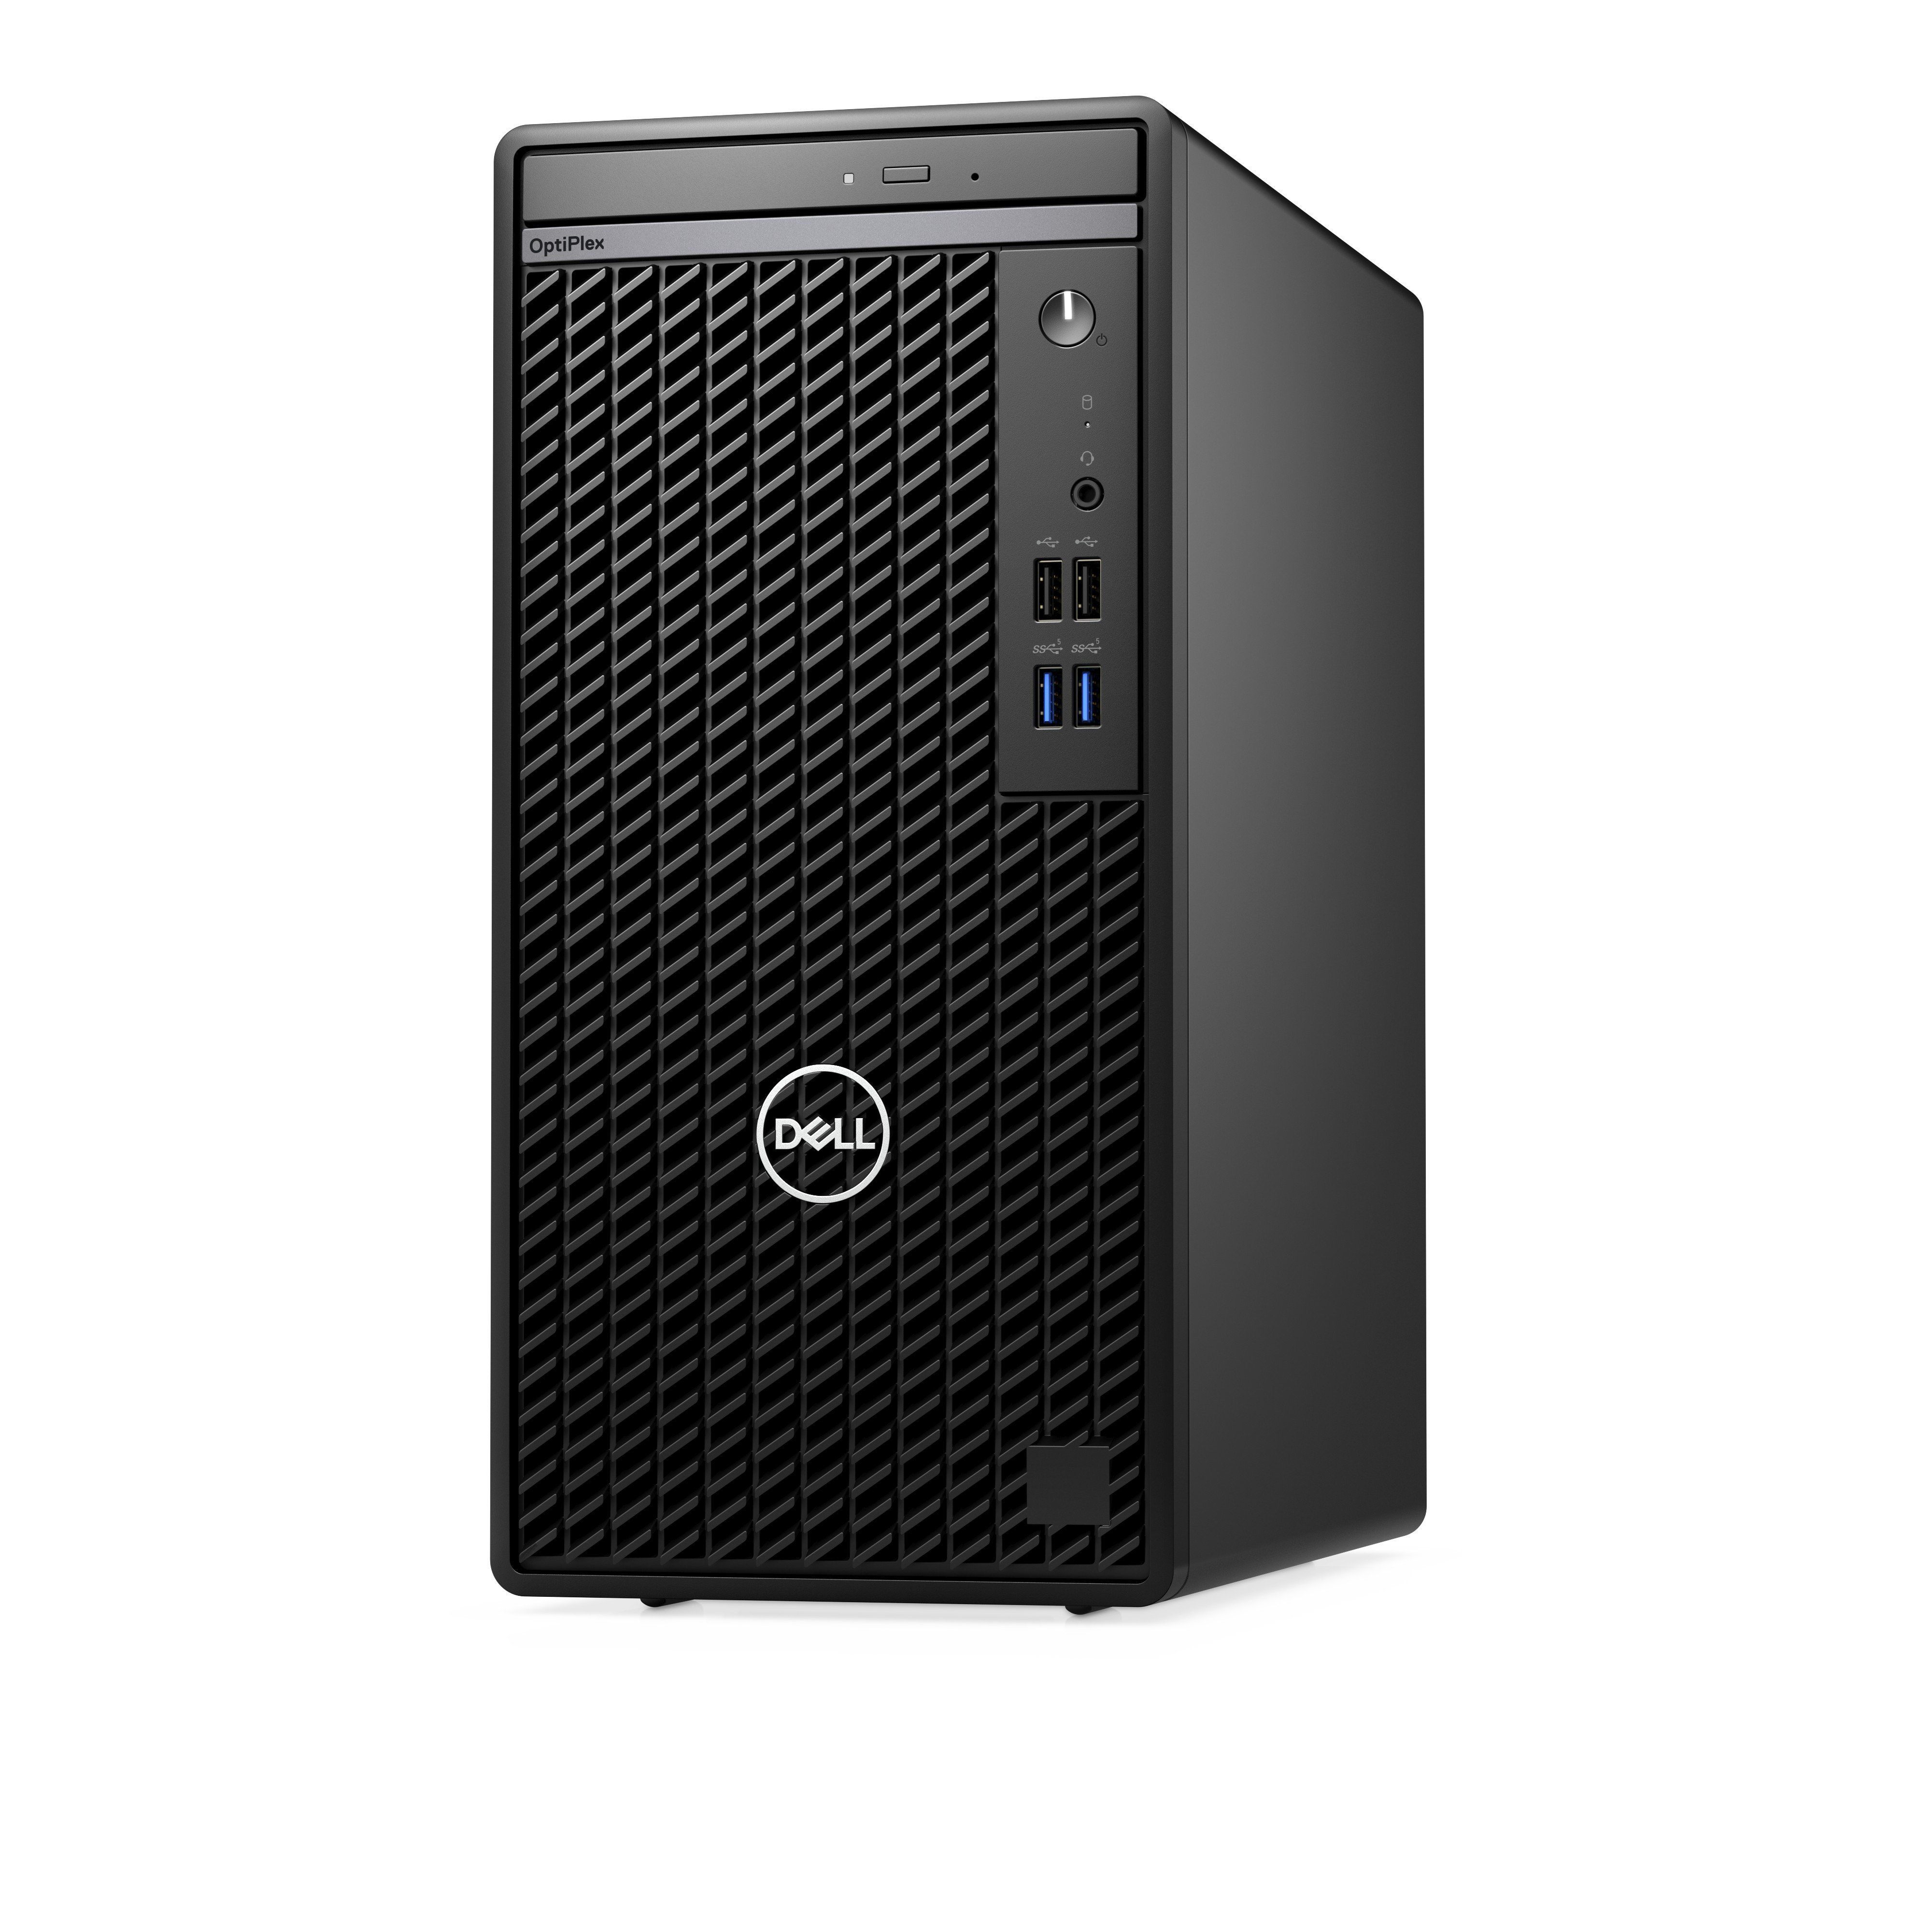 Desktop Dell OptiPlex 7010 TOWER, OptiPlex Tower with 180W Bronze Power Supply, WW, EPEAT 2018 Registered (Silver), ENERGY STAR Qualified , Trusted Platform Module (Discrete TPM Enabled), A 13th Gen i3-13100 (4 Cores/12MB/8T/3.4GHz to 4.5GHz/60W), Intel Integrated Graphics, 8GB (1x8GB) DDR4 Non-ECC_1